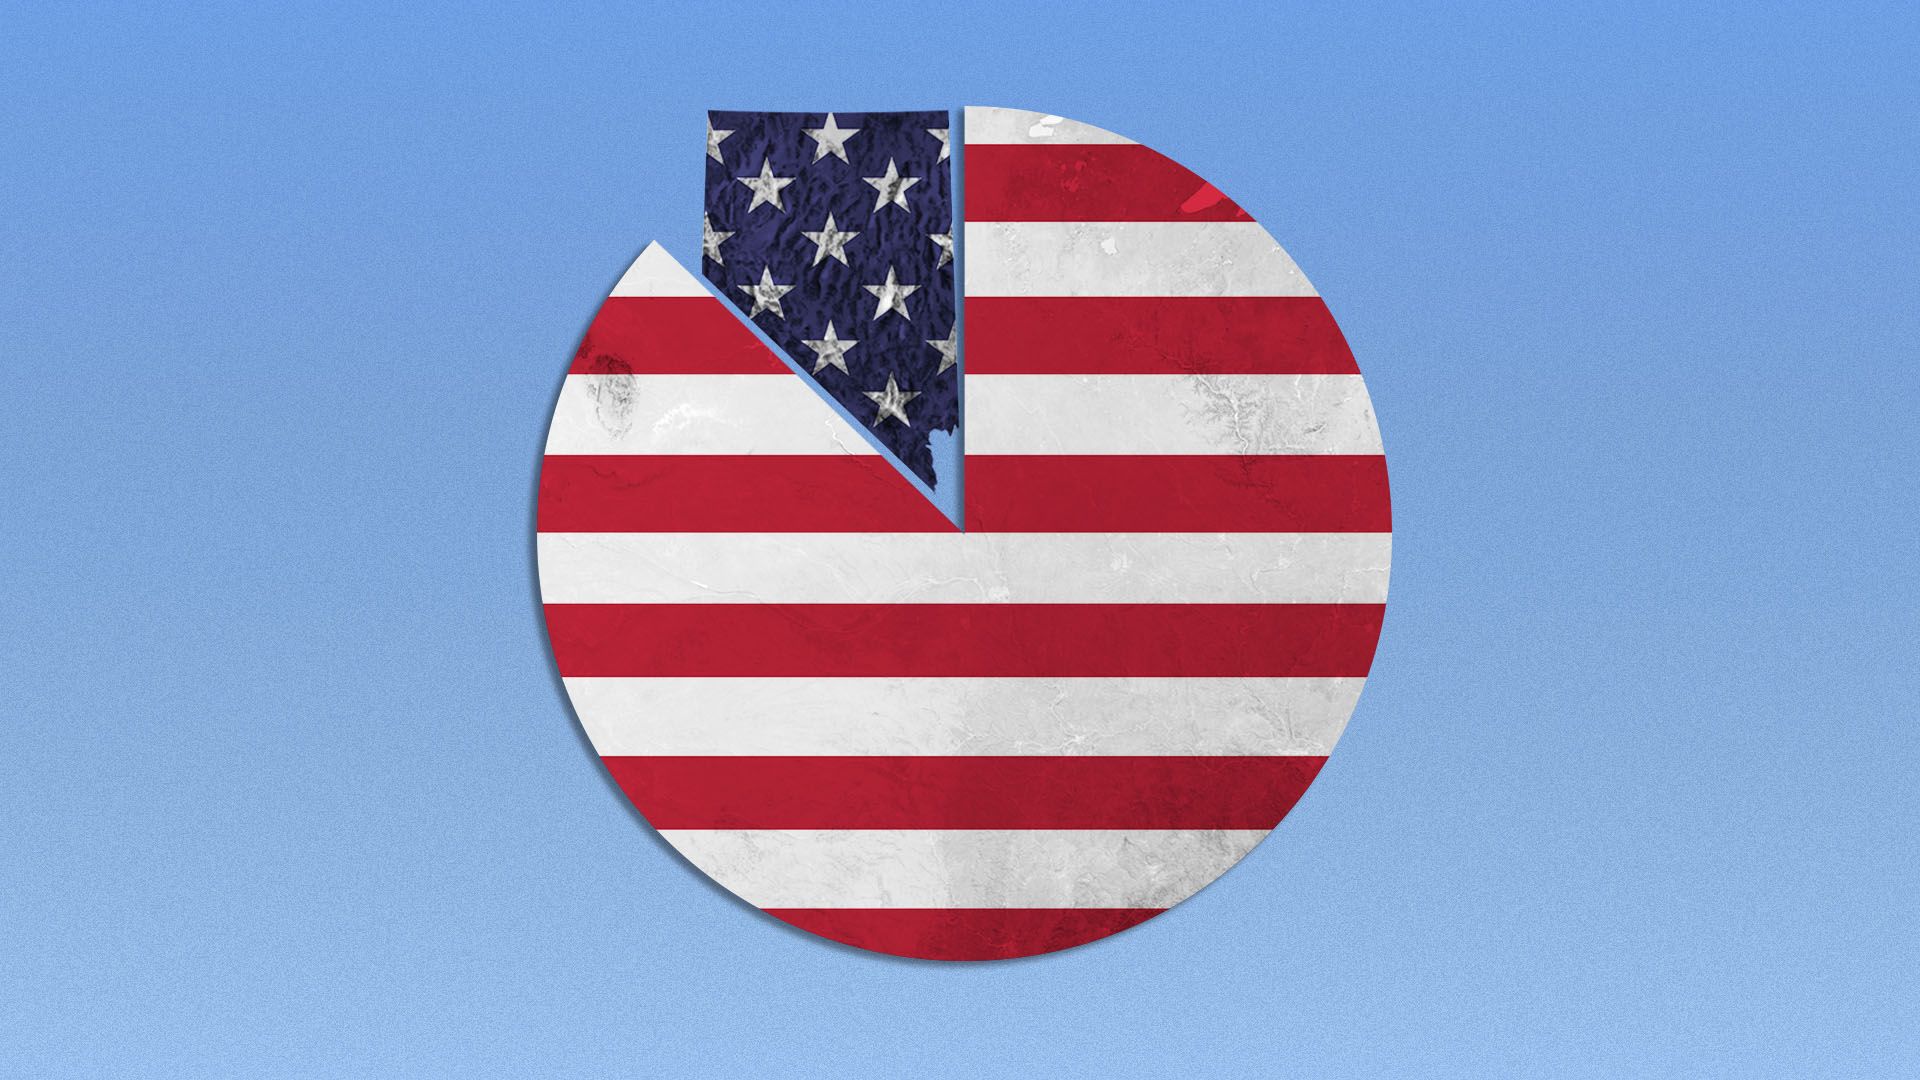 Illustration of the U.S. flag in the shape of a pie chart, with one big slice in the shape of Nevada